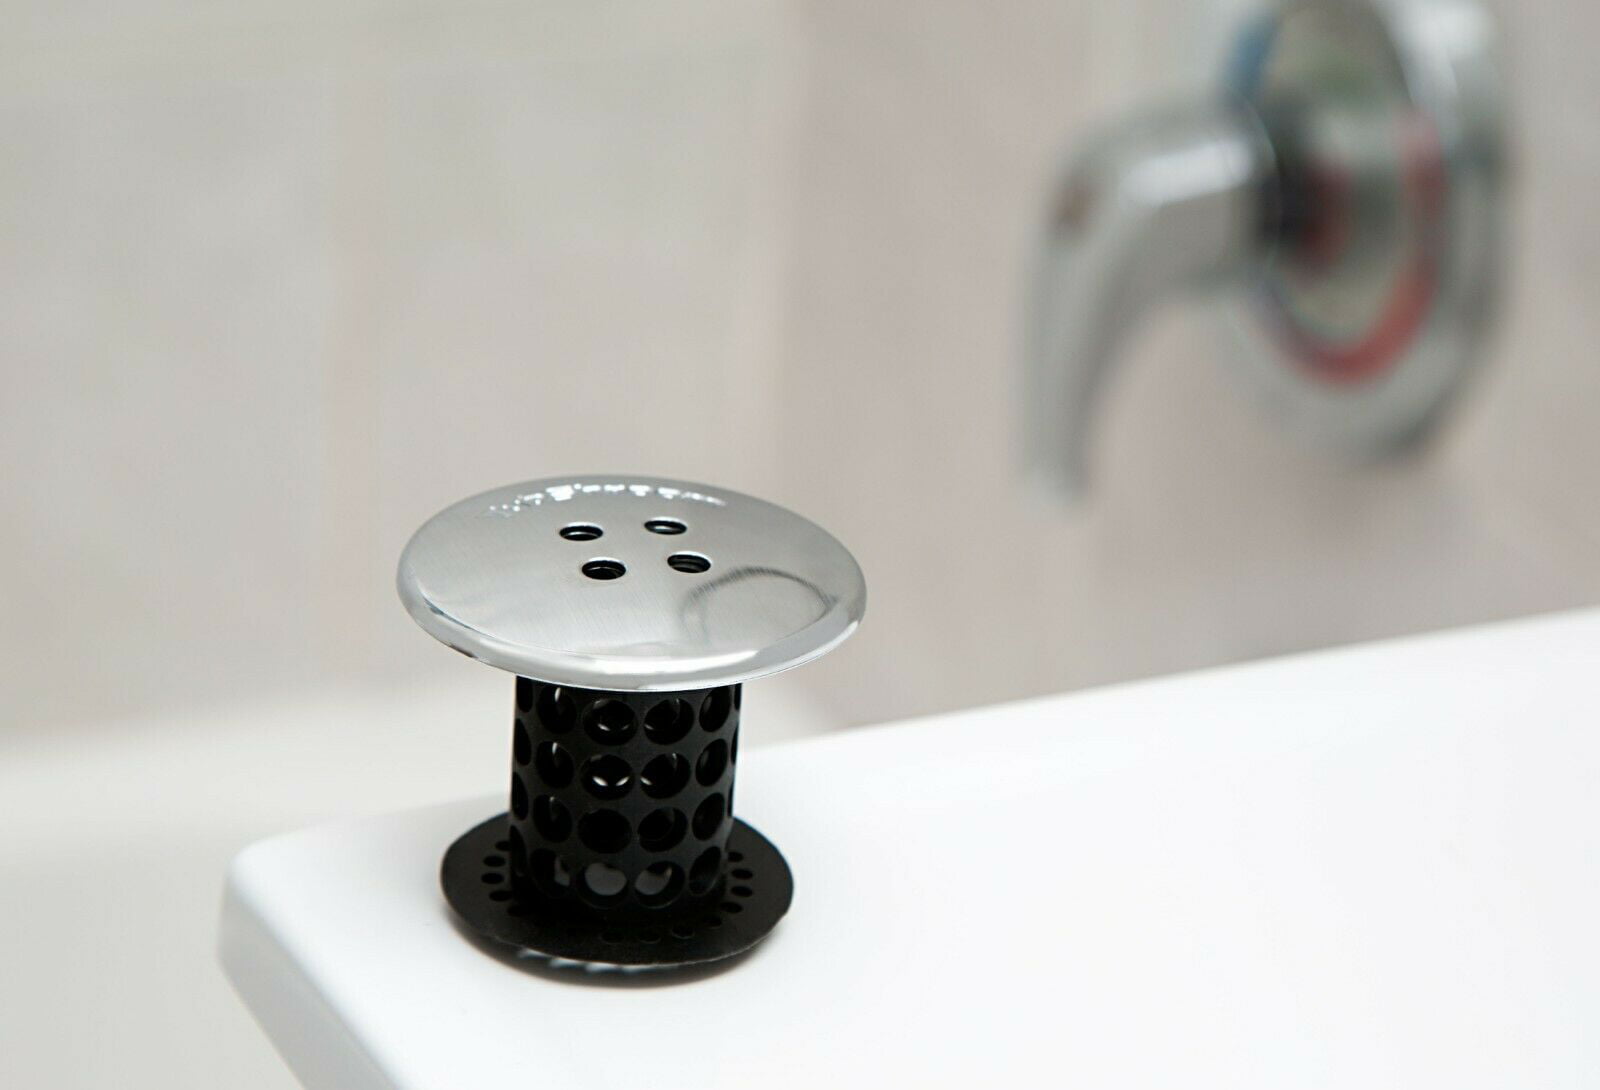 TubShroom Tub Hair Catcher Protector, Fits 1.5″ - 1.75″ Drain, Gray -  Coupon Codes, Promo Codes, Daily Deals, Save Money Today